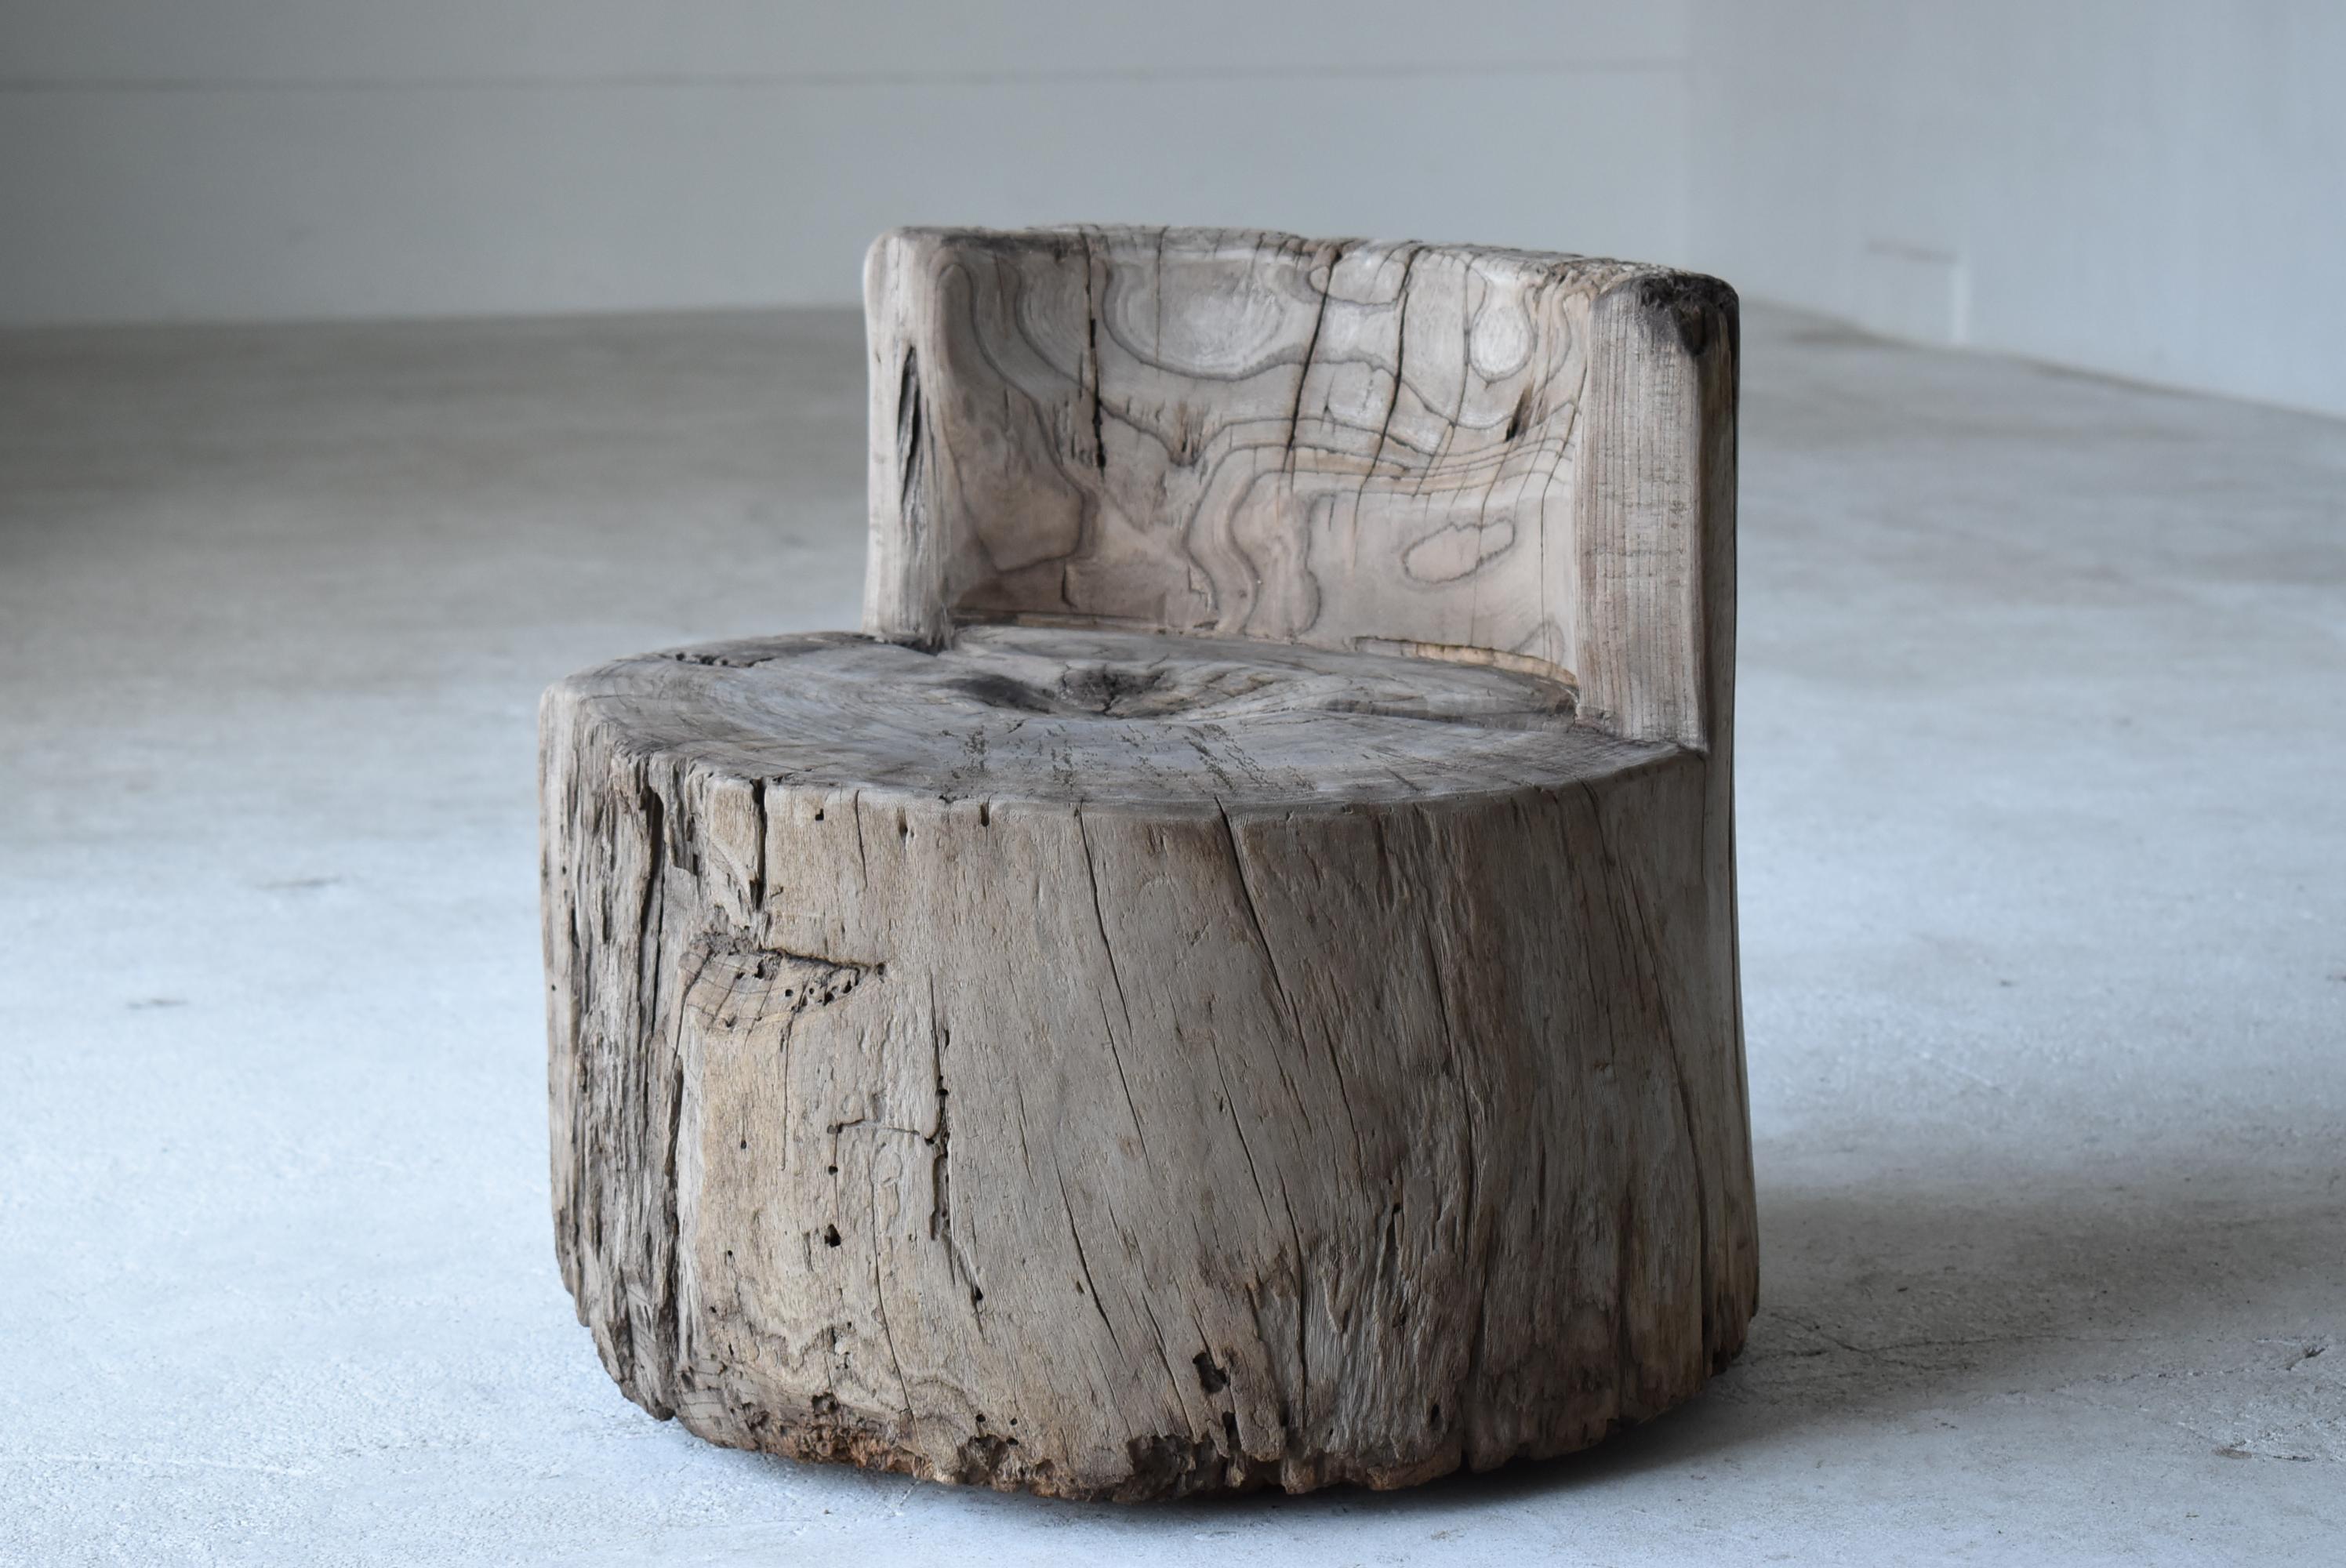 This is an old primitive chair made in Japan.
It is from the Meiji period (1860s-1920s).
The material is zelkova.
It is a very rare item.

It was carved from a large zelkova tree.
It is powerful and the grain is very beautiful.

There are no